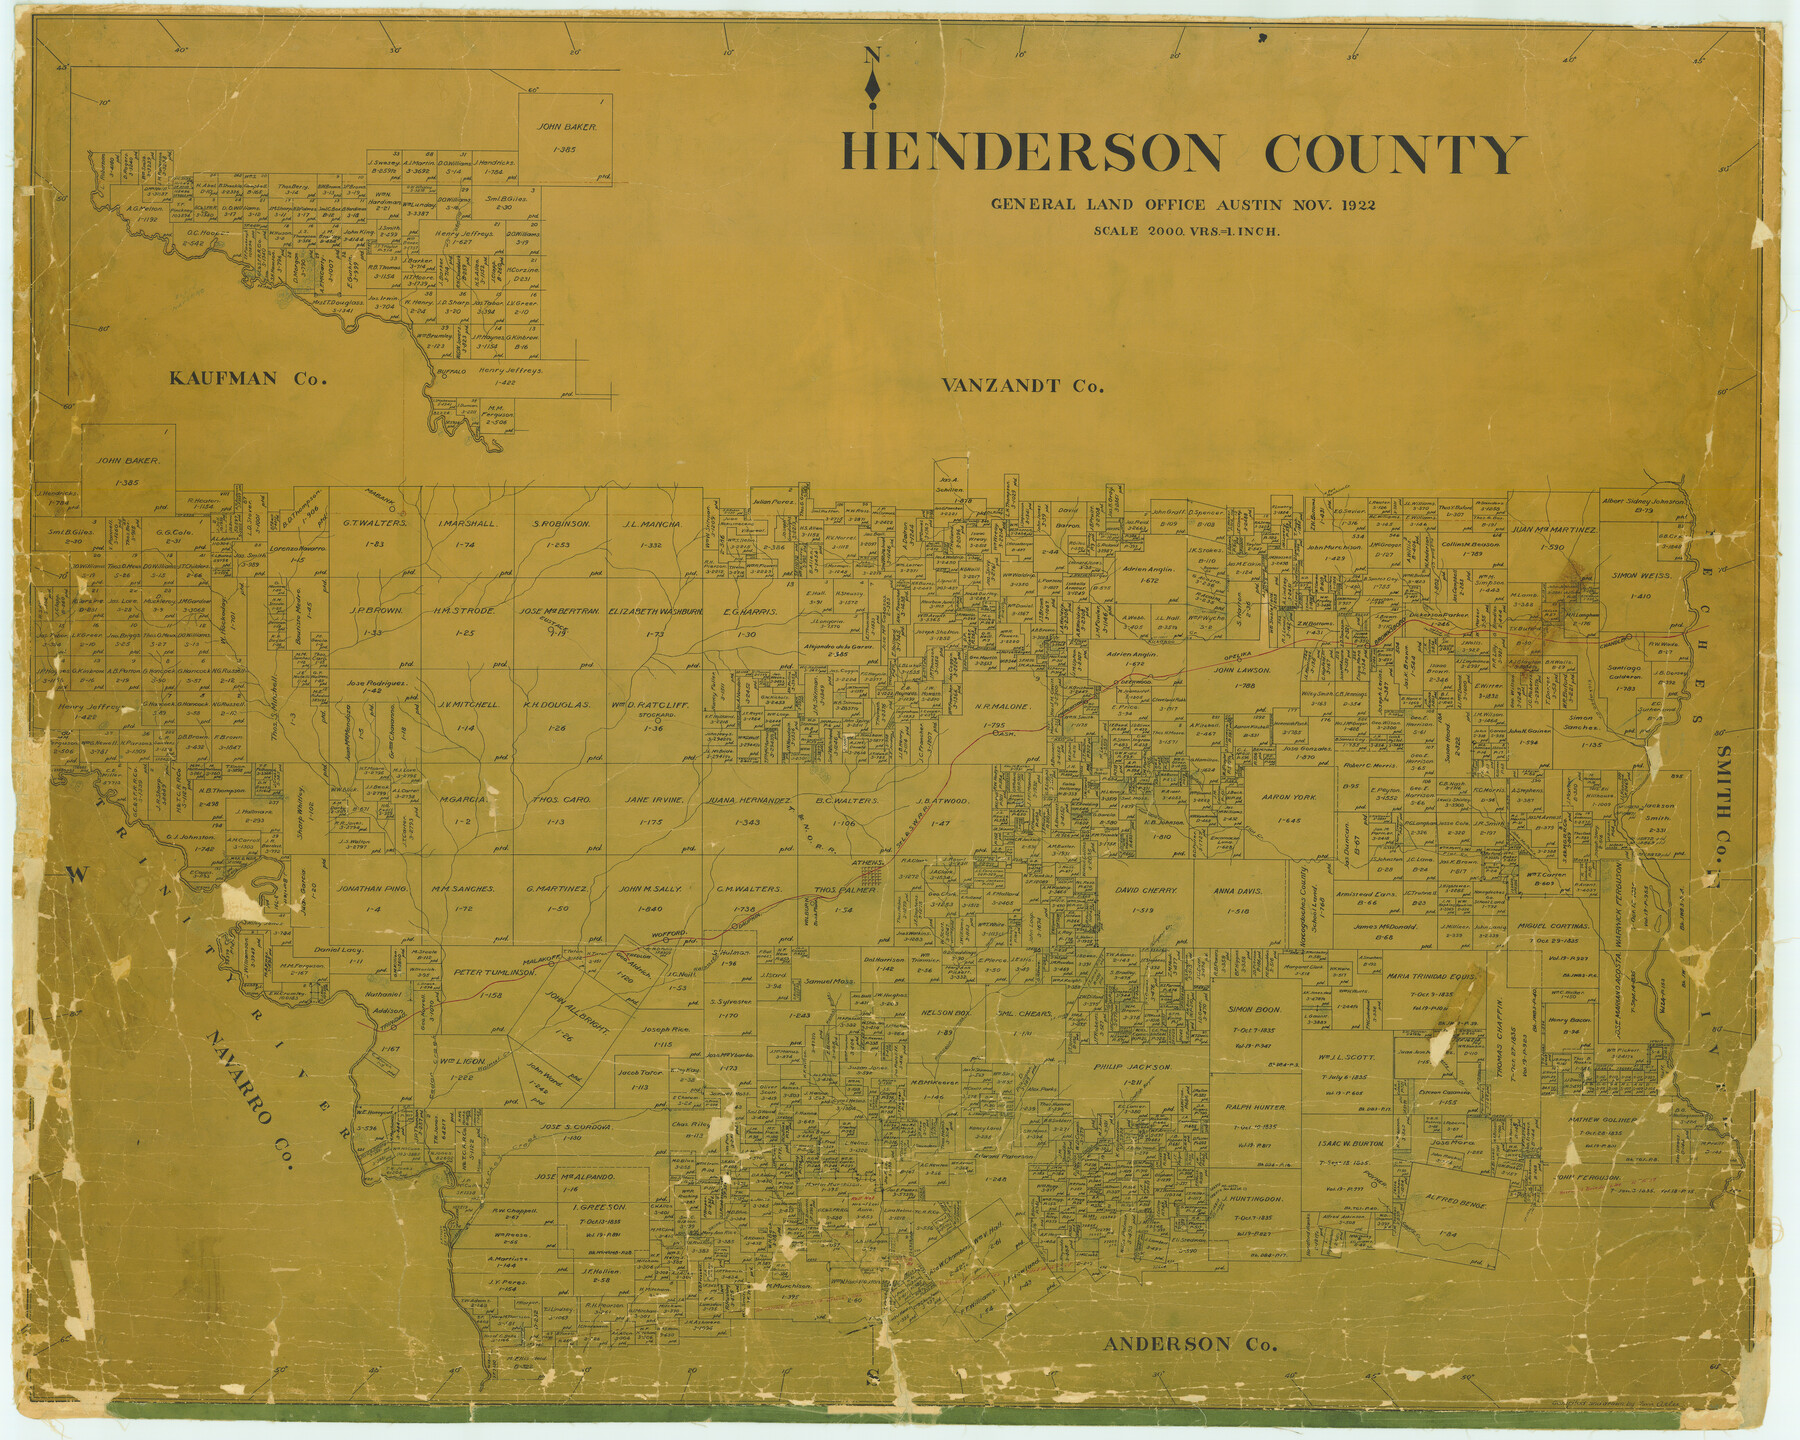 Henderson County 4683, Henderson County, General Map Collection